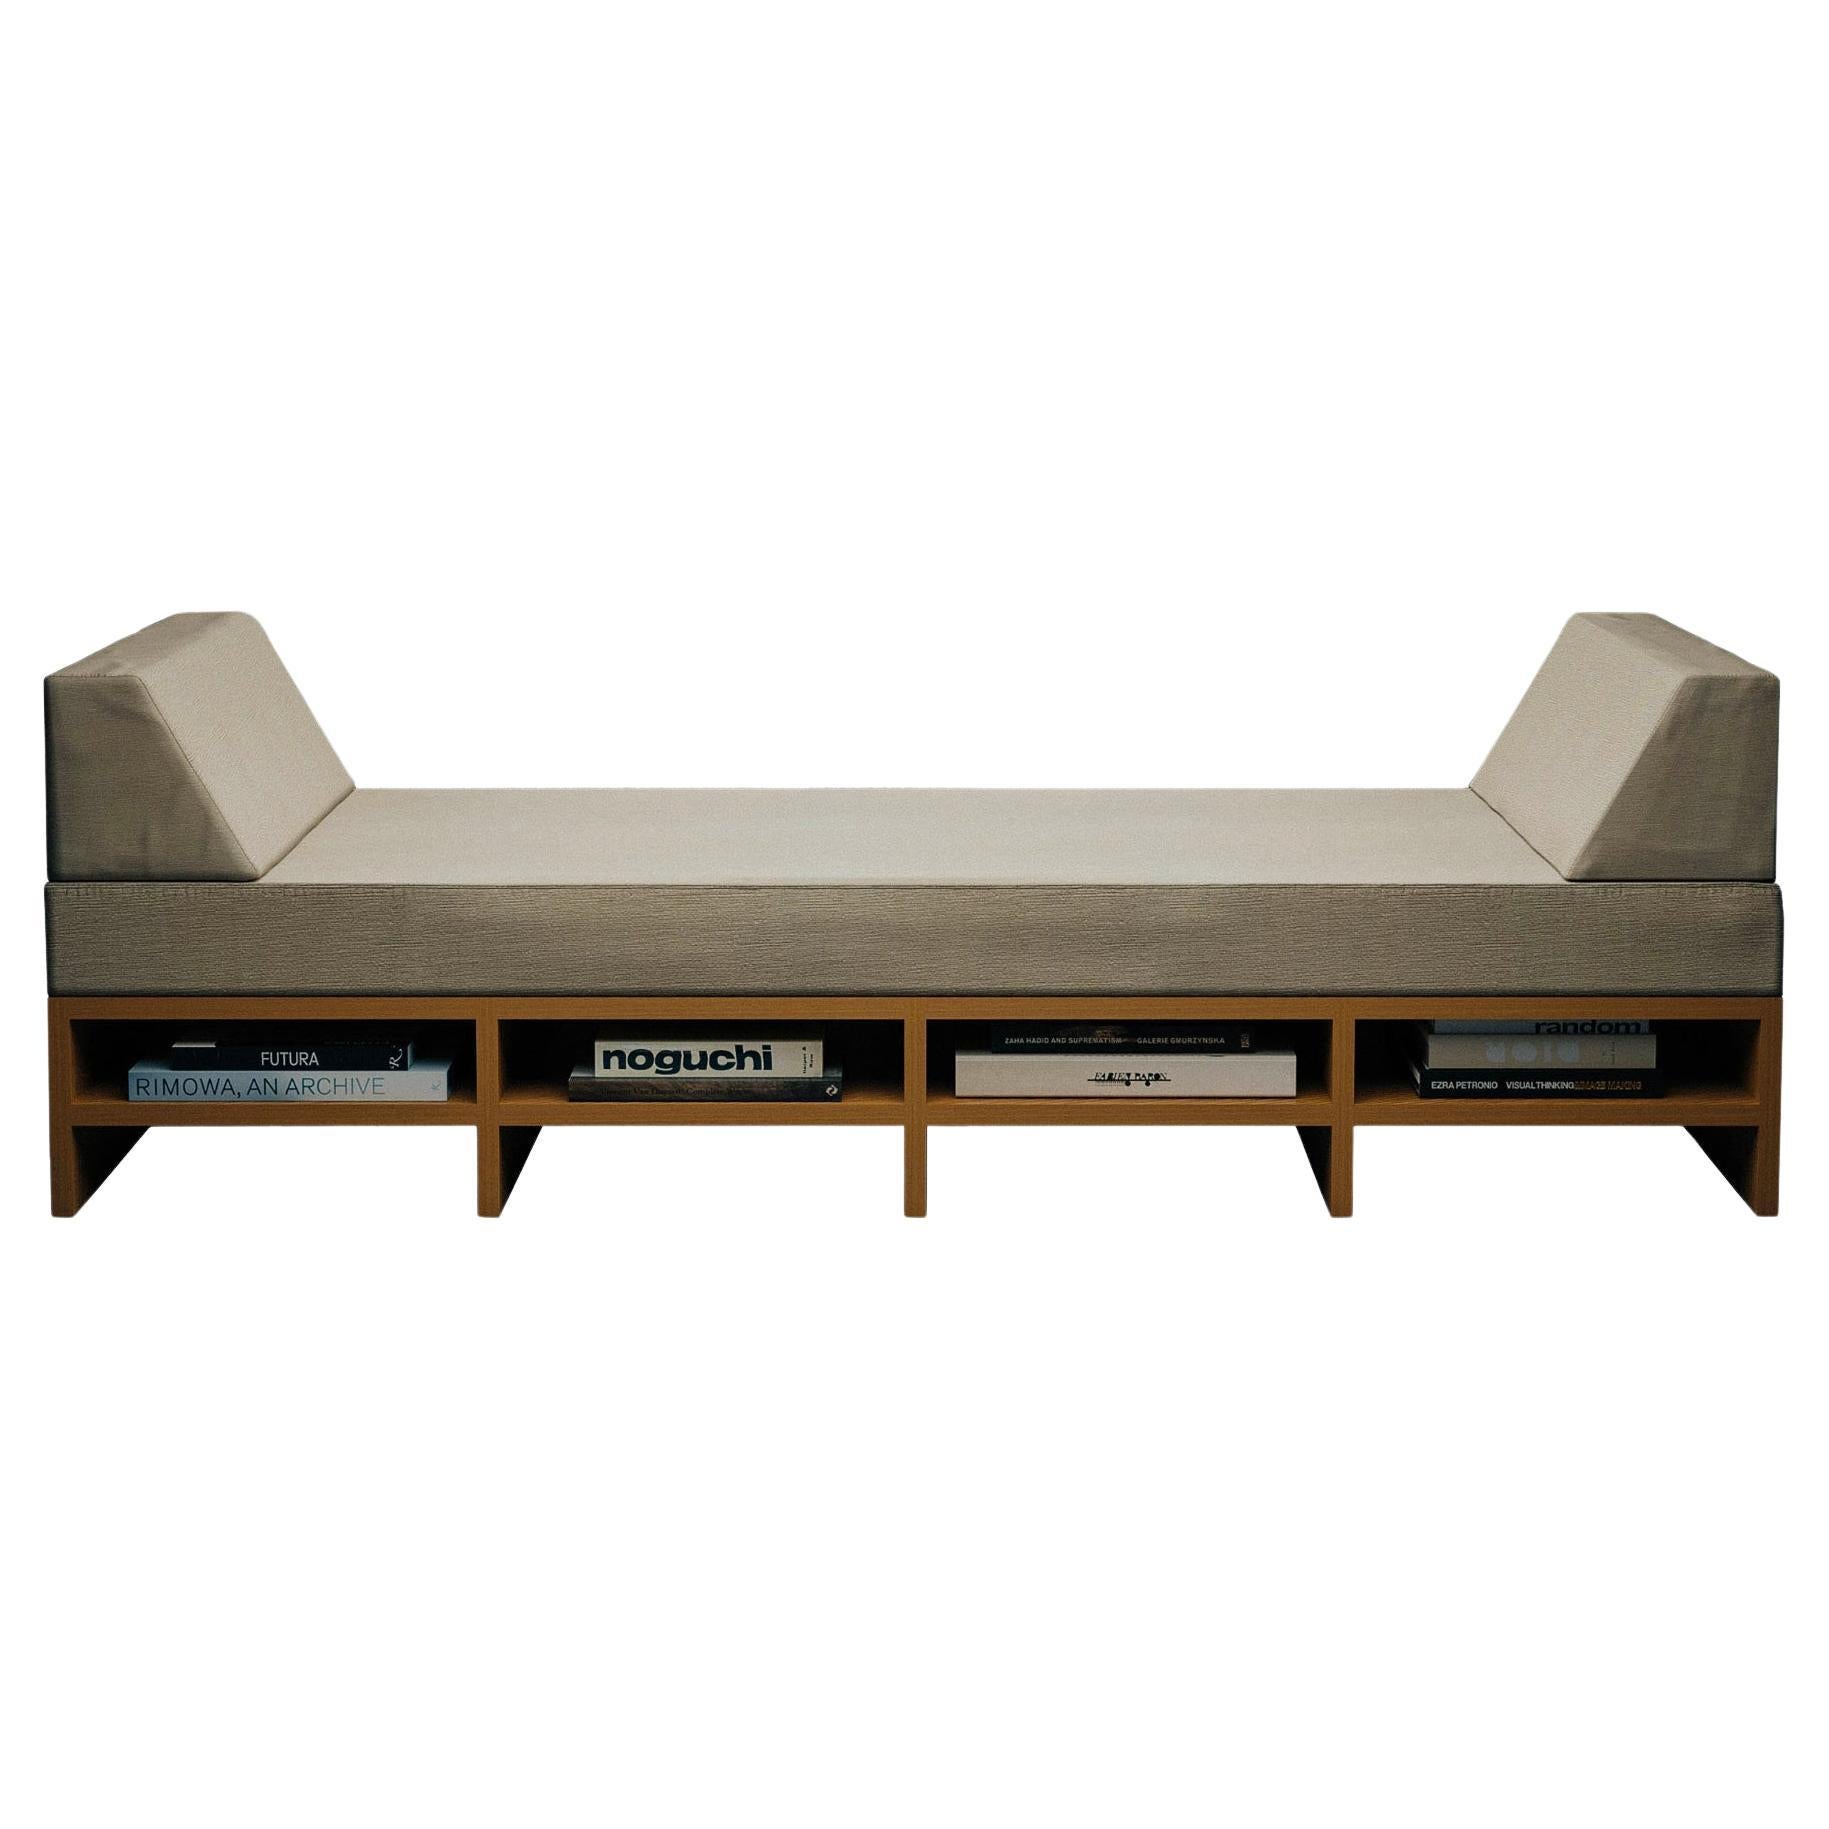 The Shelf Daybed by Haris Fazlani, REP by Tuleste Factory